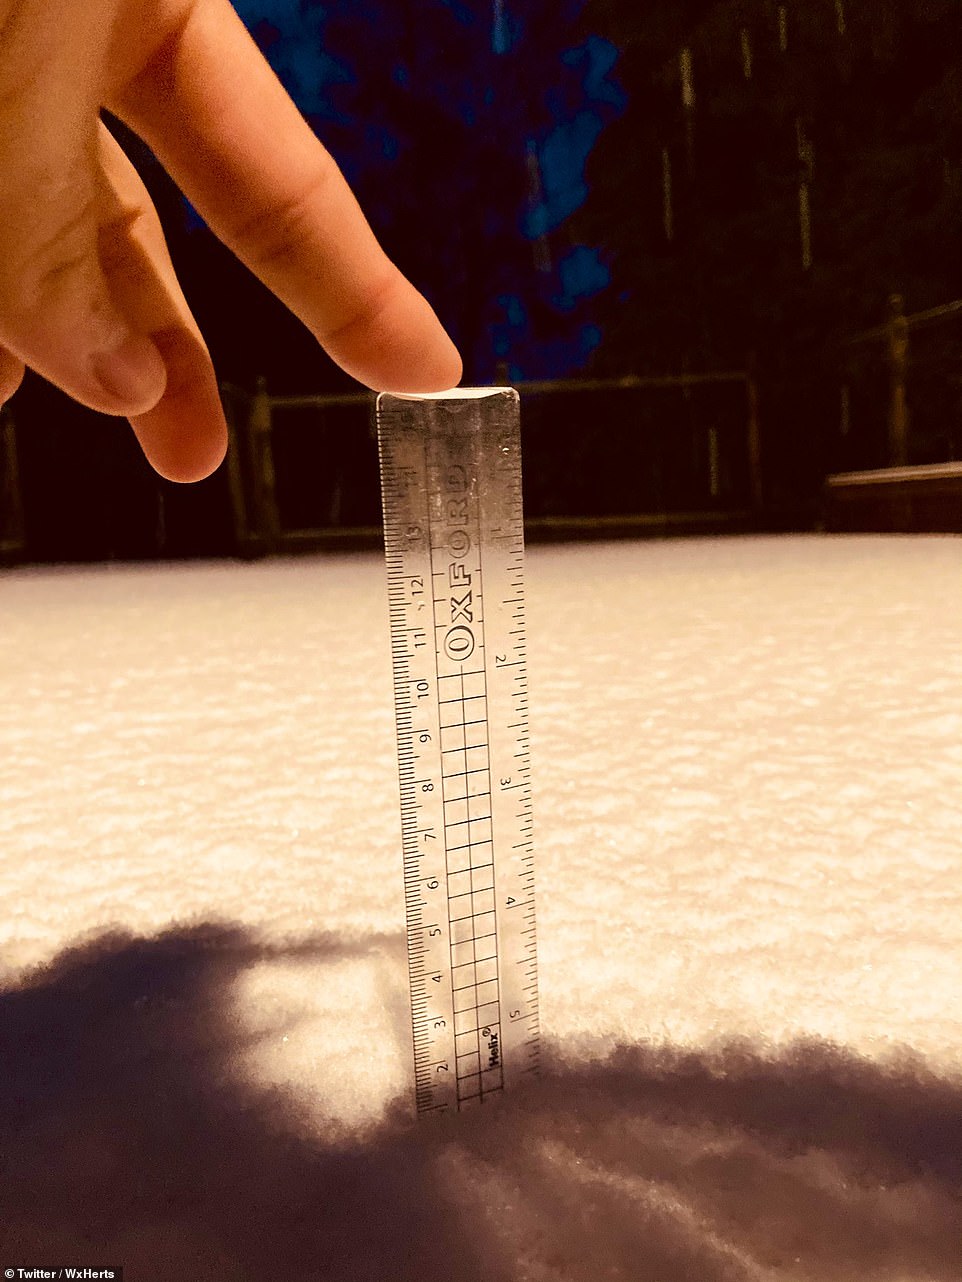 A Twitter-user in Enfield, London, took out a ruler to measure almost a centimetre of snow this morning. He wrote: 'It’s tried its best to settle on gritted roads but intensity is lowering now to 4/10 EN4 #uksnow ..embarrassingly this is probably the most snow here in almost 2 years (since early Feb 2019)'